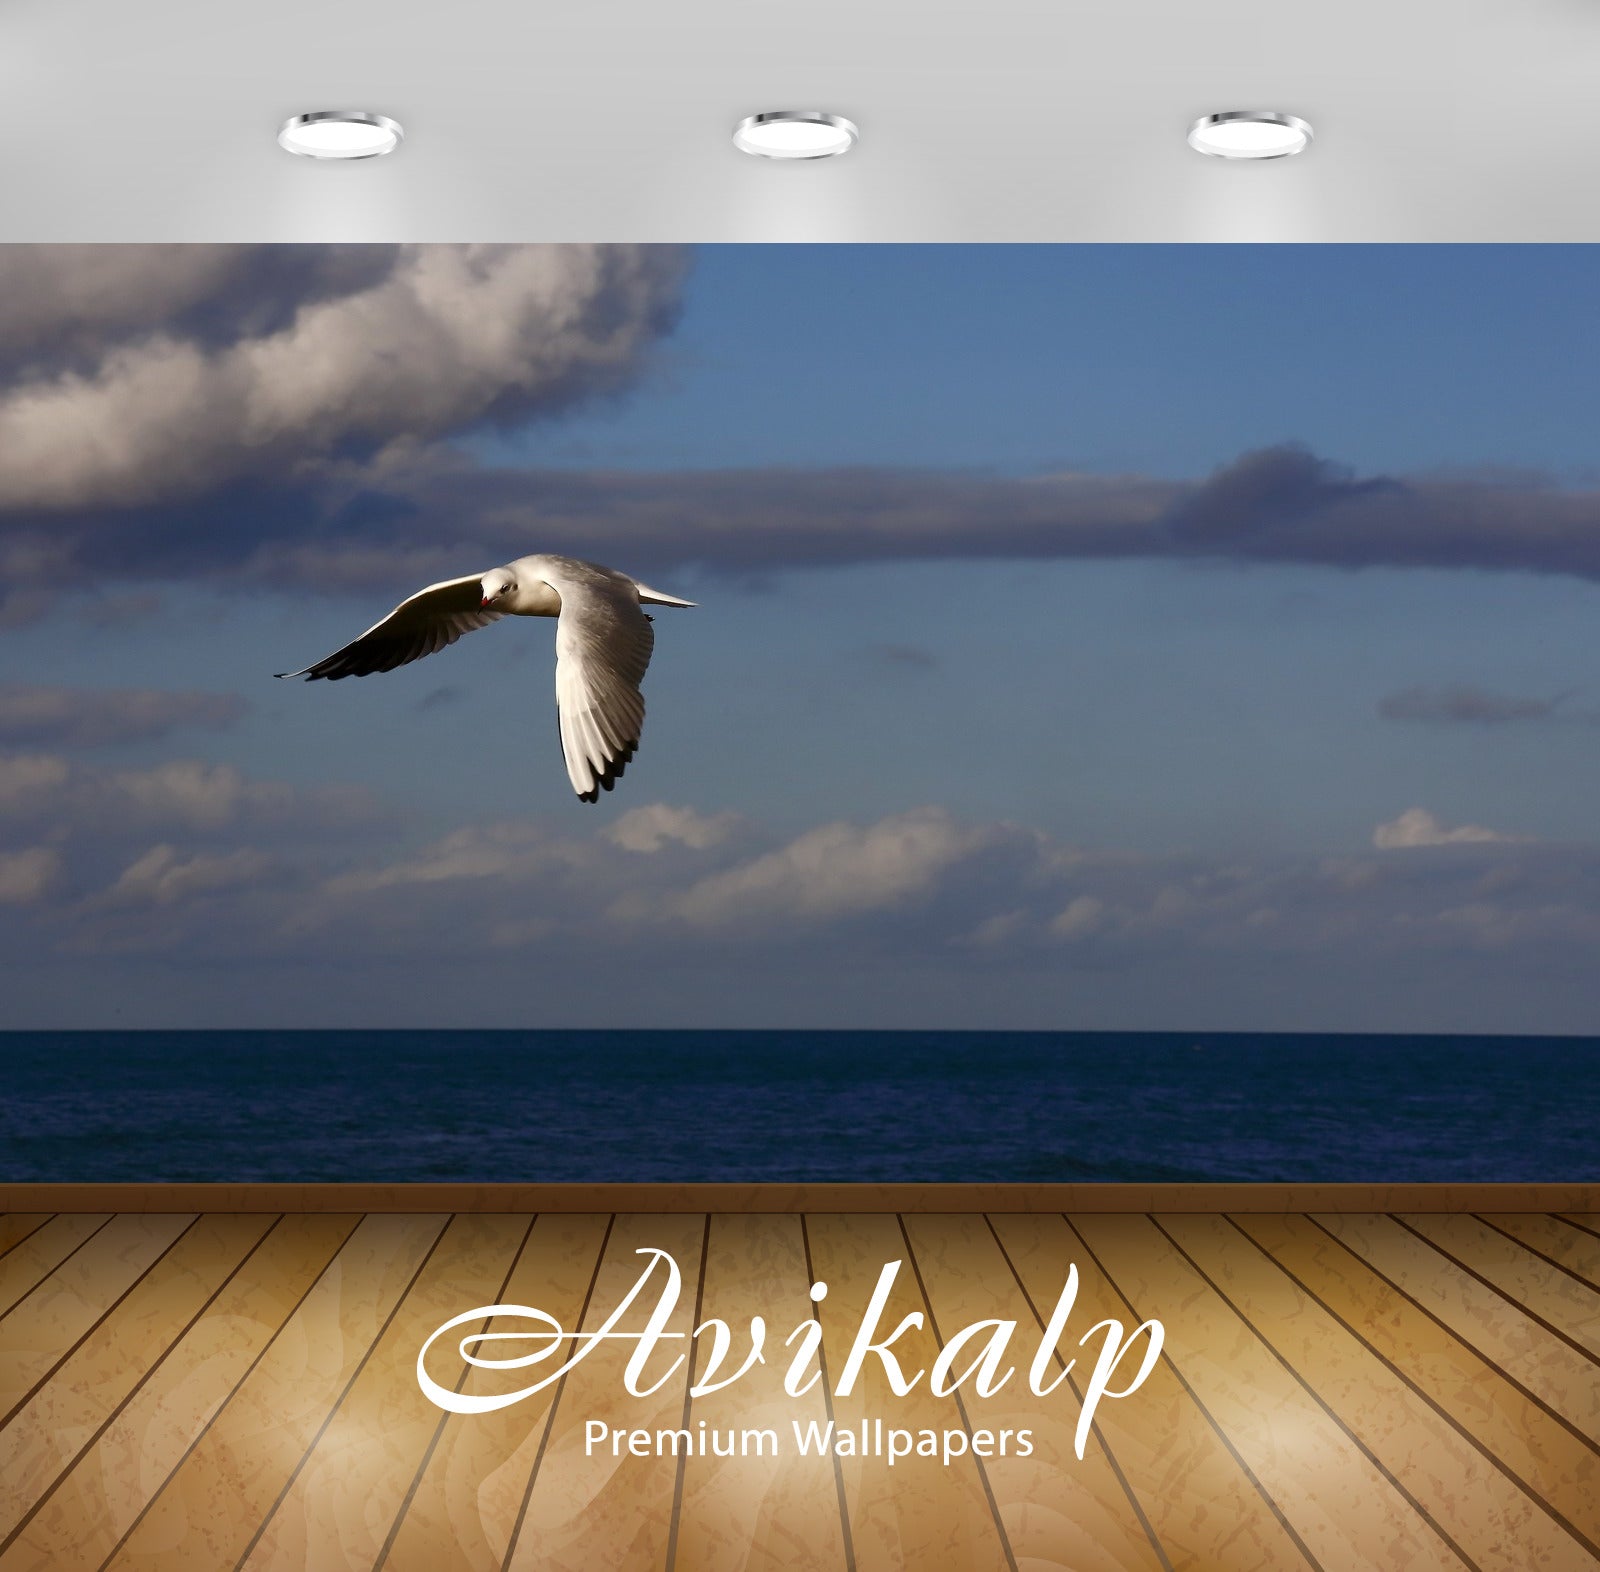 Avikalp Exclusive Awi1378 Birds Full HD Wallpapers for Living room, Hall, Kids Room, Kitchen, TV Bac